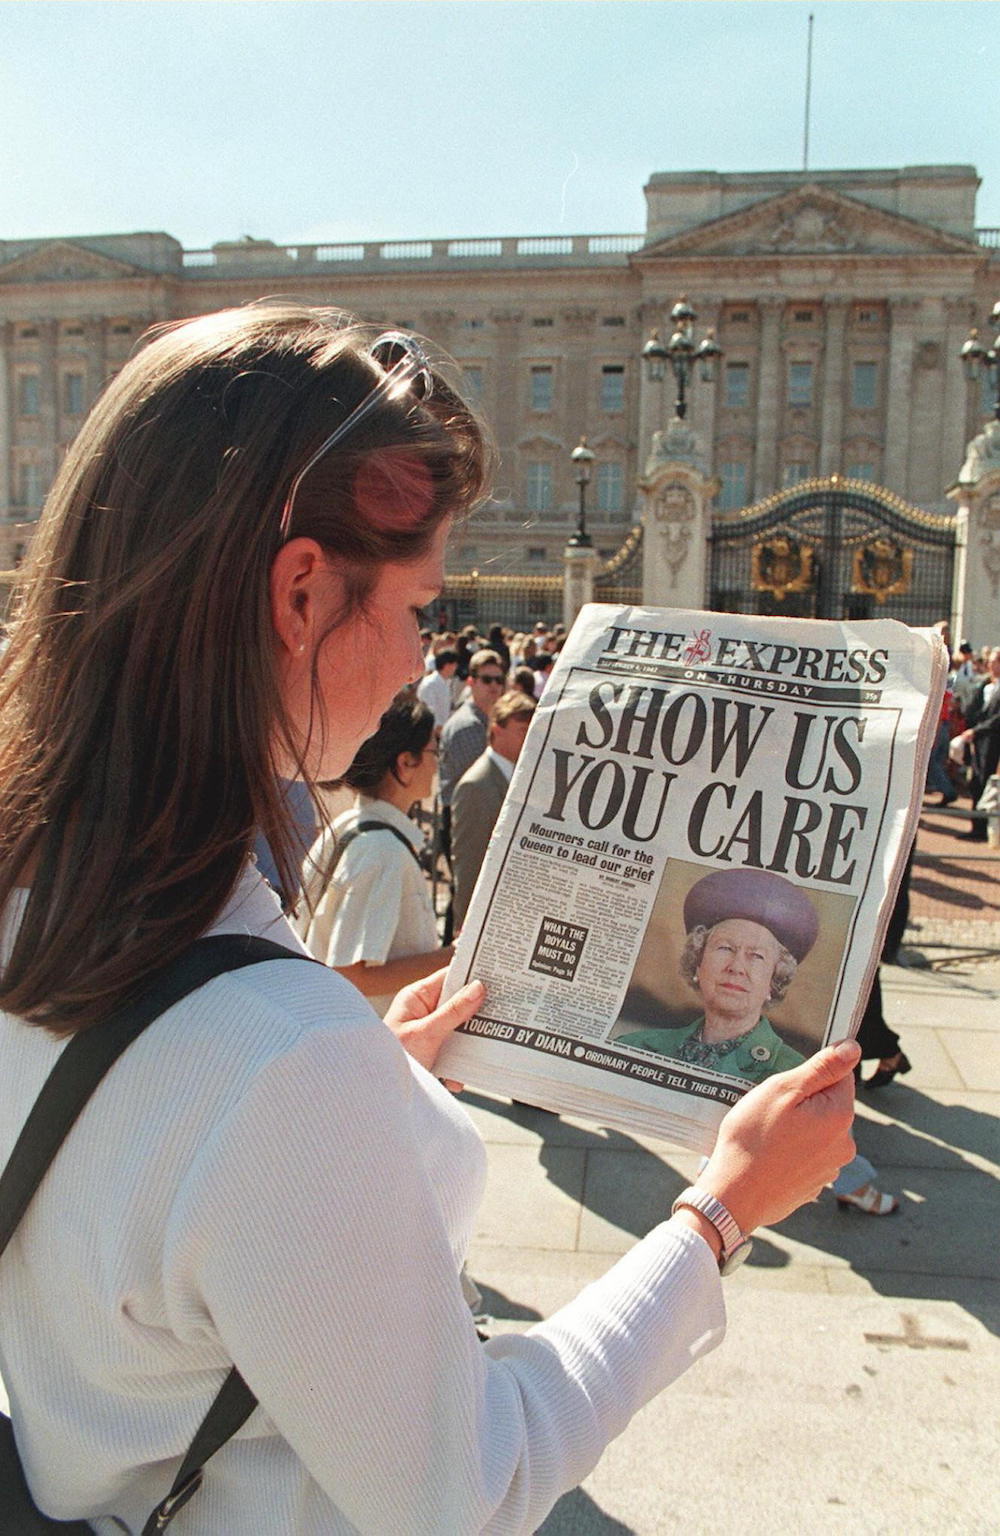 Outside Buckingham Palace, a Londoner reads headlines criticizing the Queen's silence since Princess Diana's death